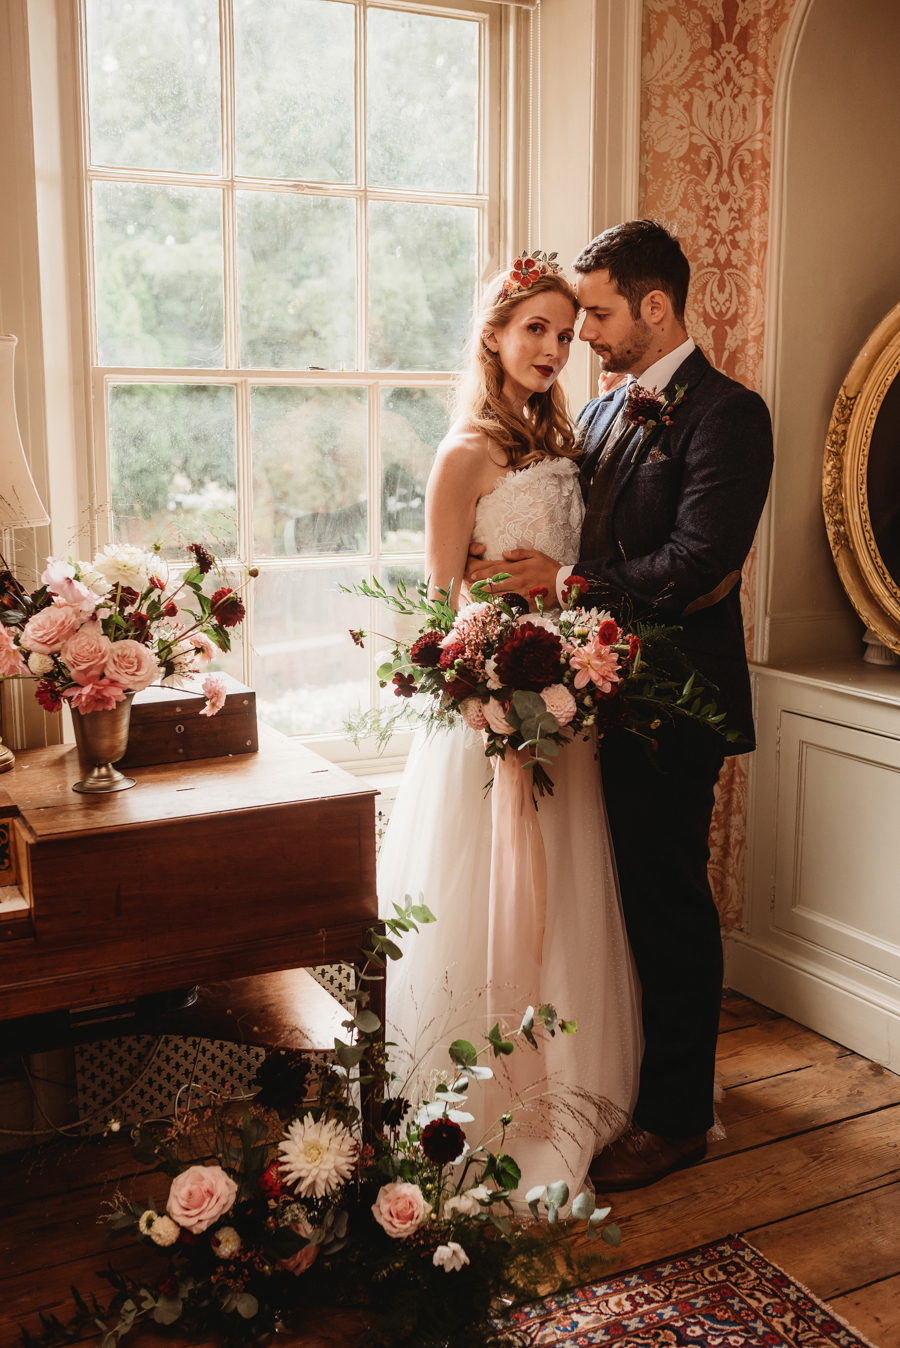 Traditional Country House Christmas Wedding in Cambridgeshire